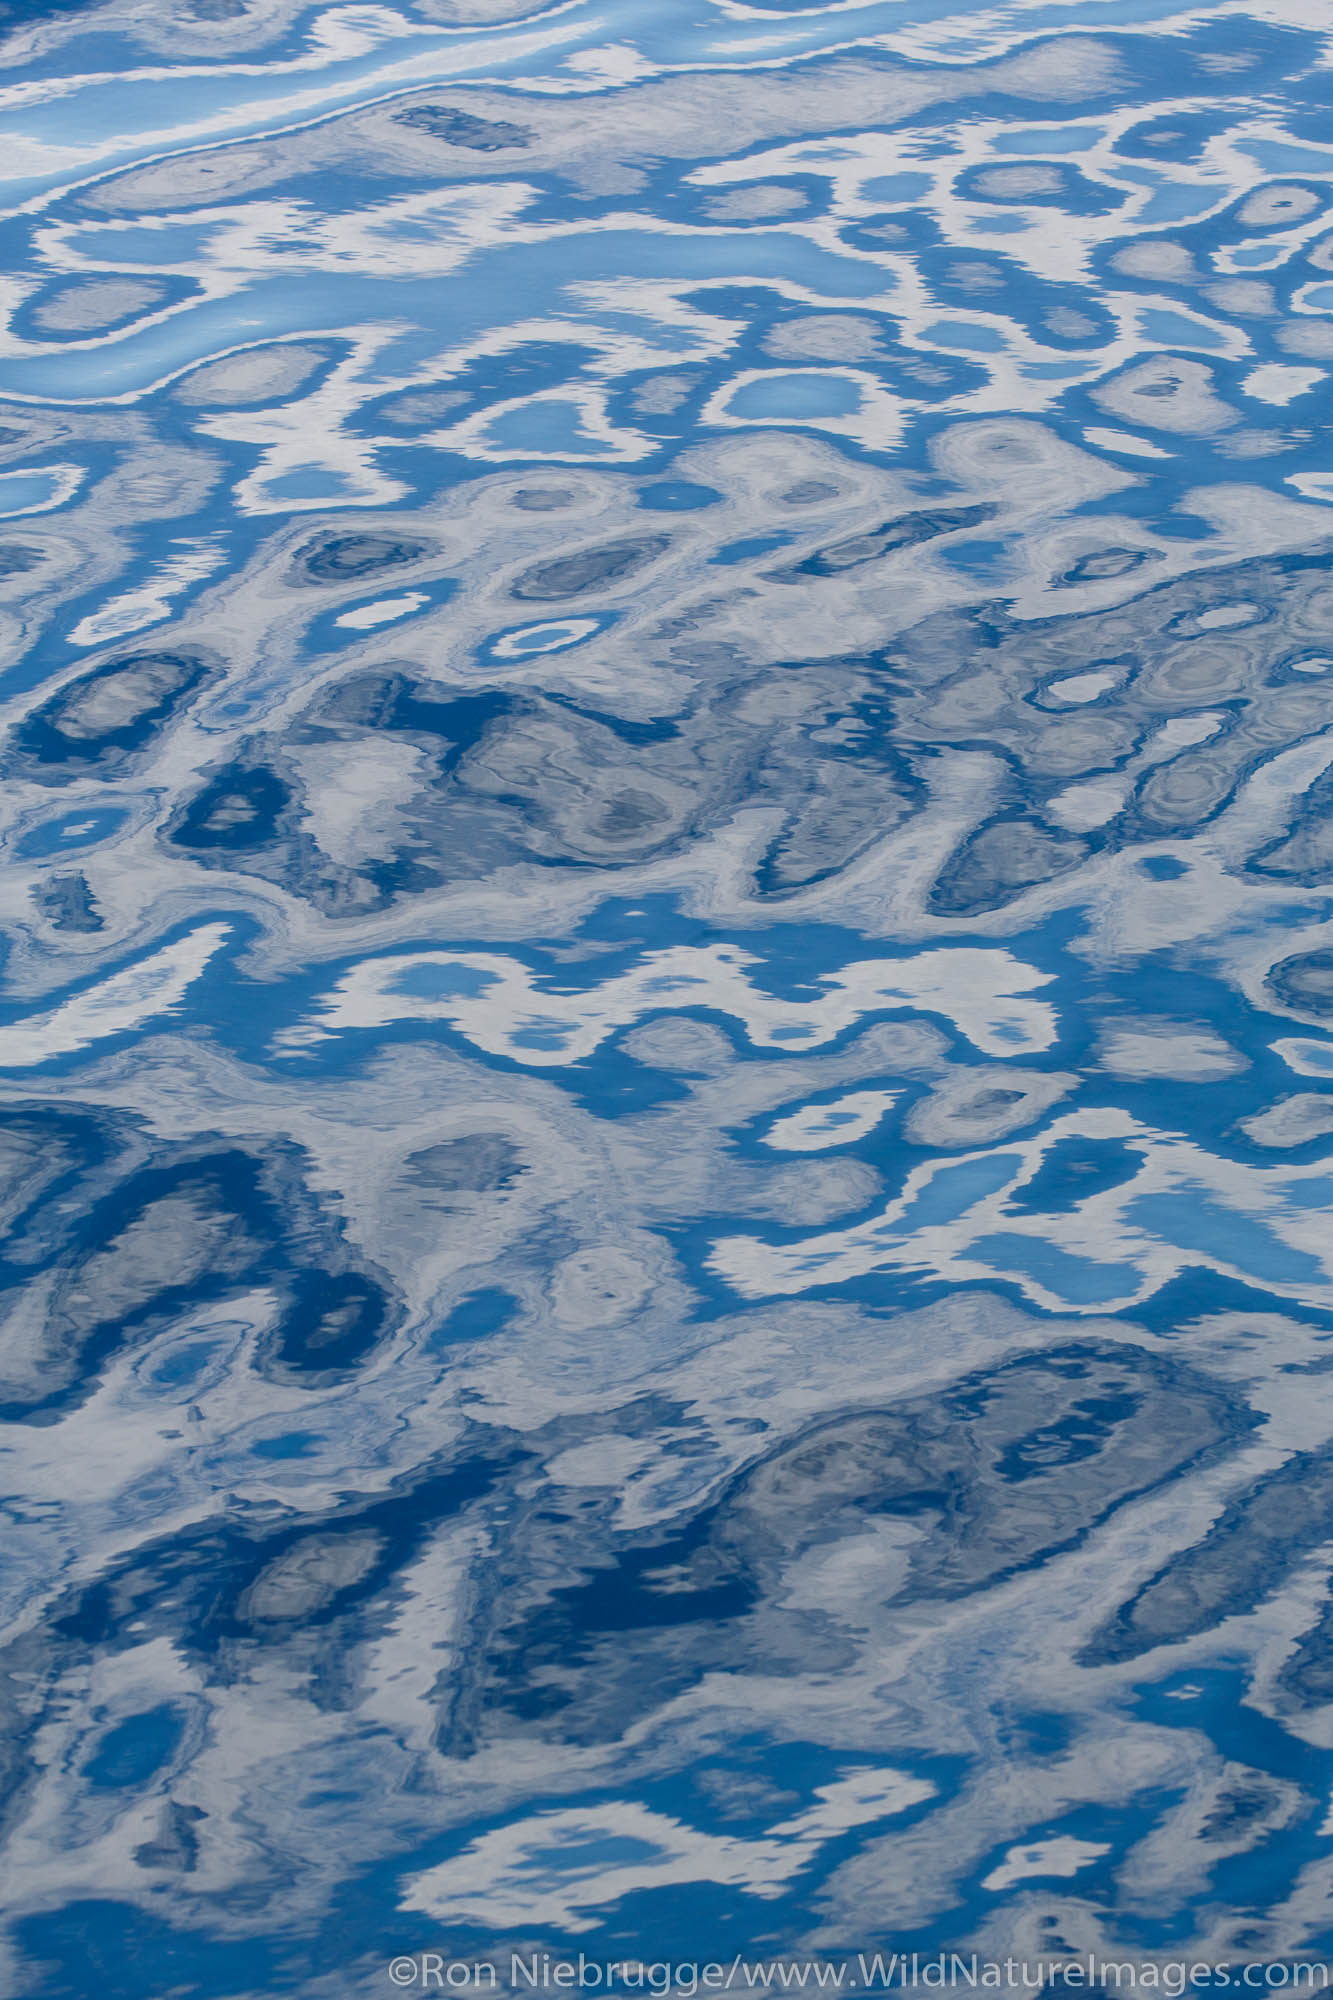 Patterns of the ocean, Tongass National Forest, Alaska.